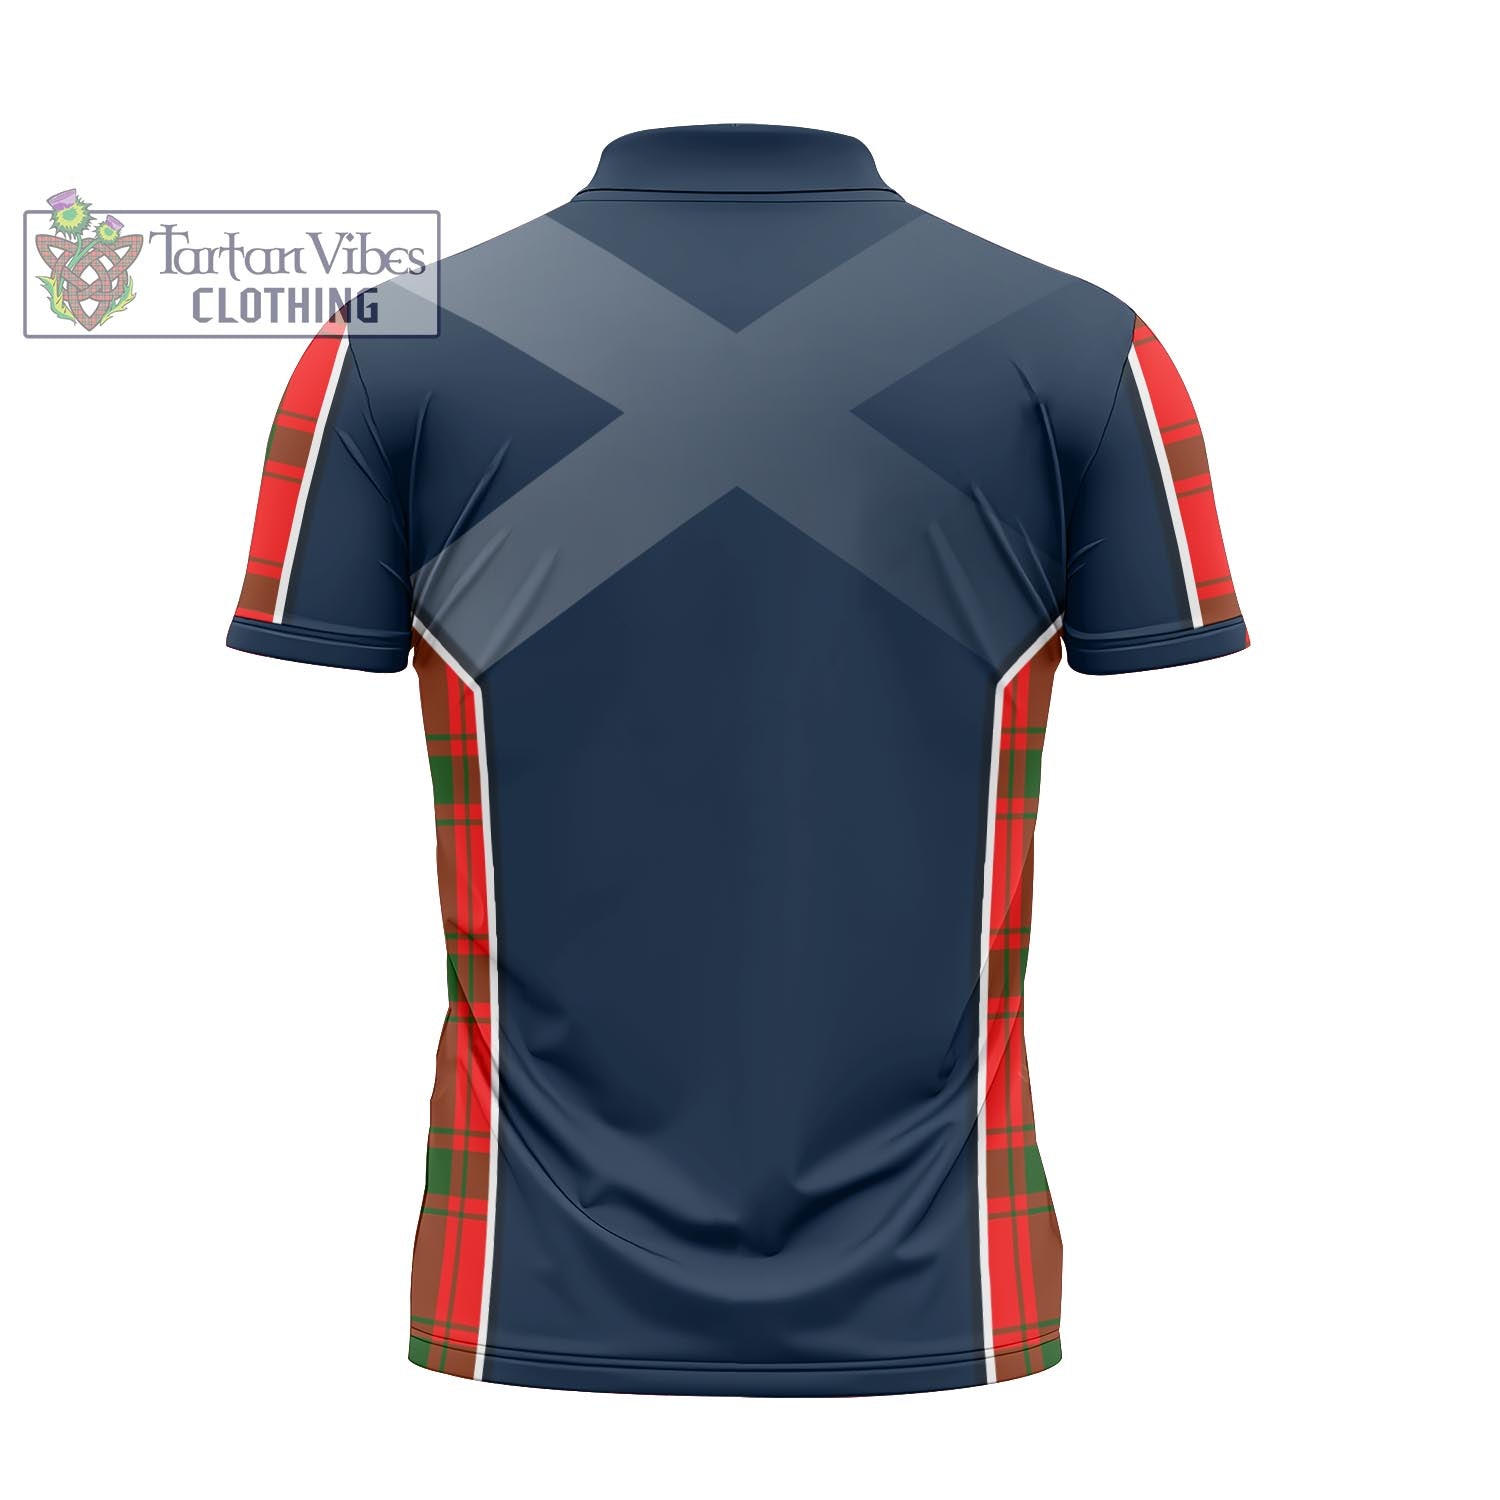 Tartan Vibes Clothing Darroch Tartan Zipper Polo Shirt with Family Crest and Scottish Thistle Vibes Sport Style